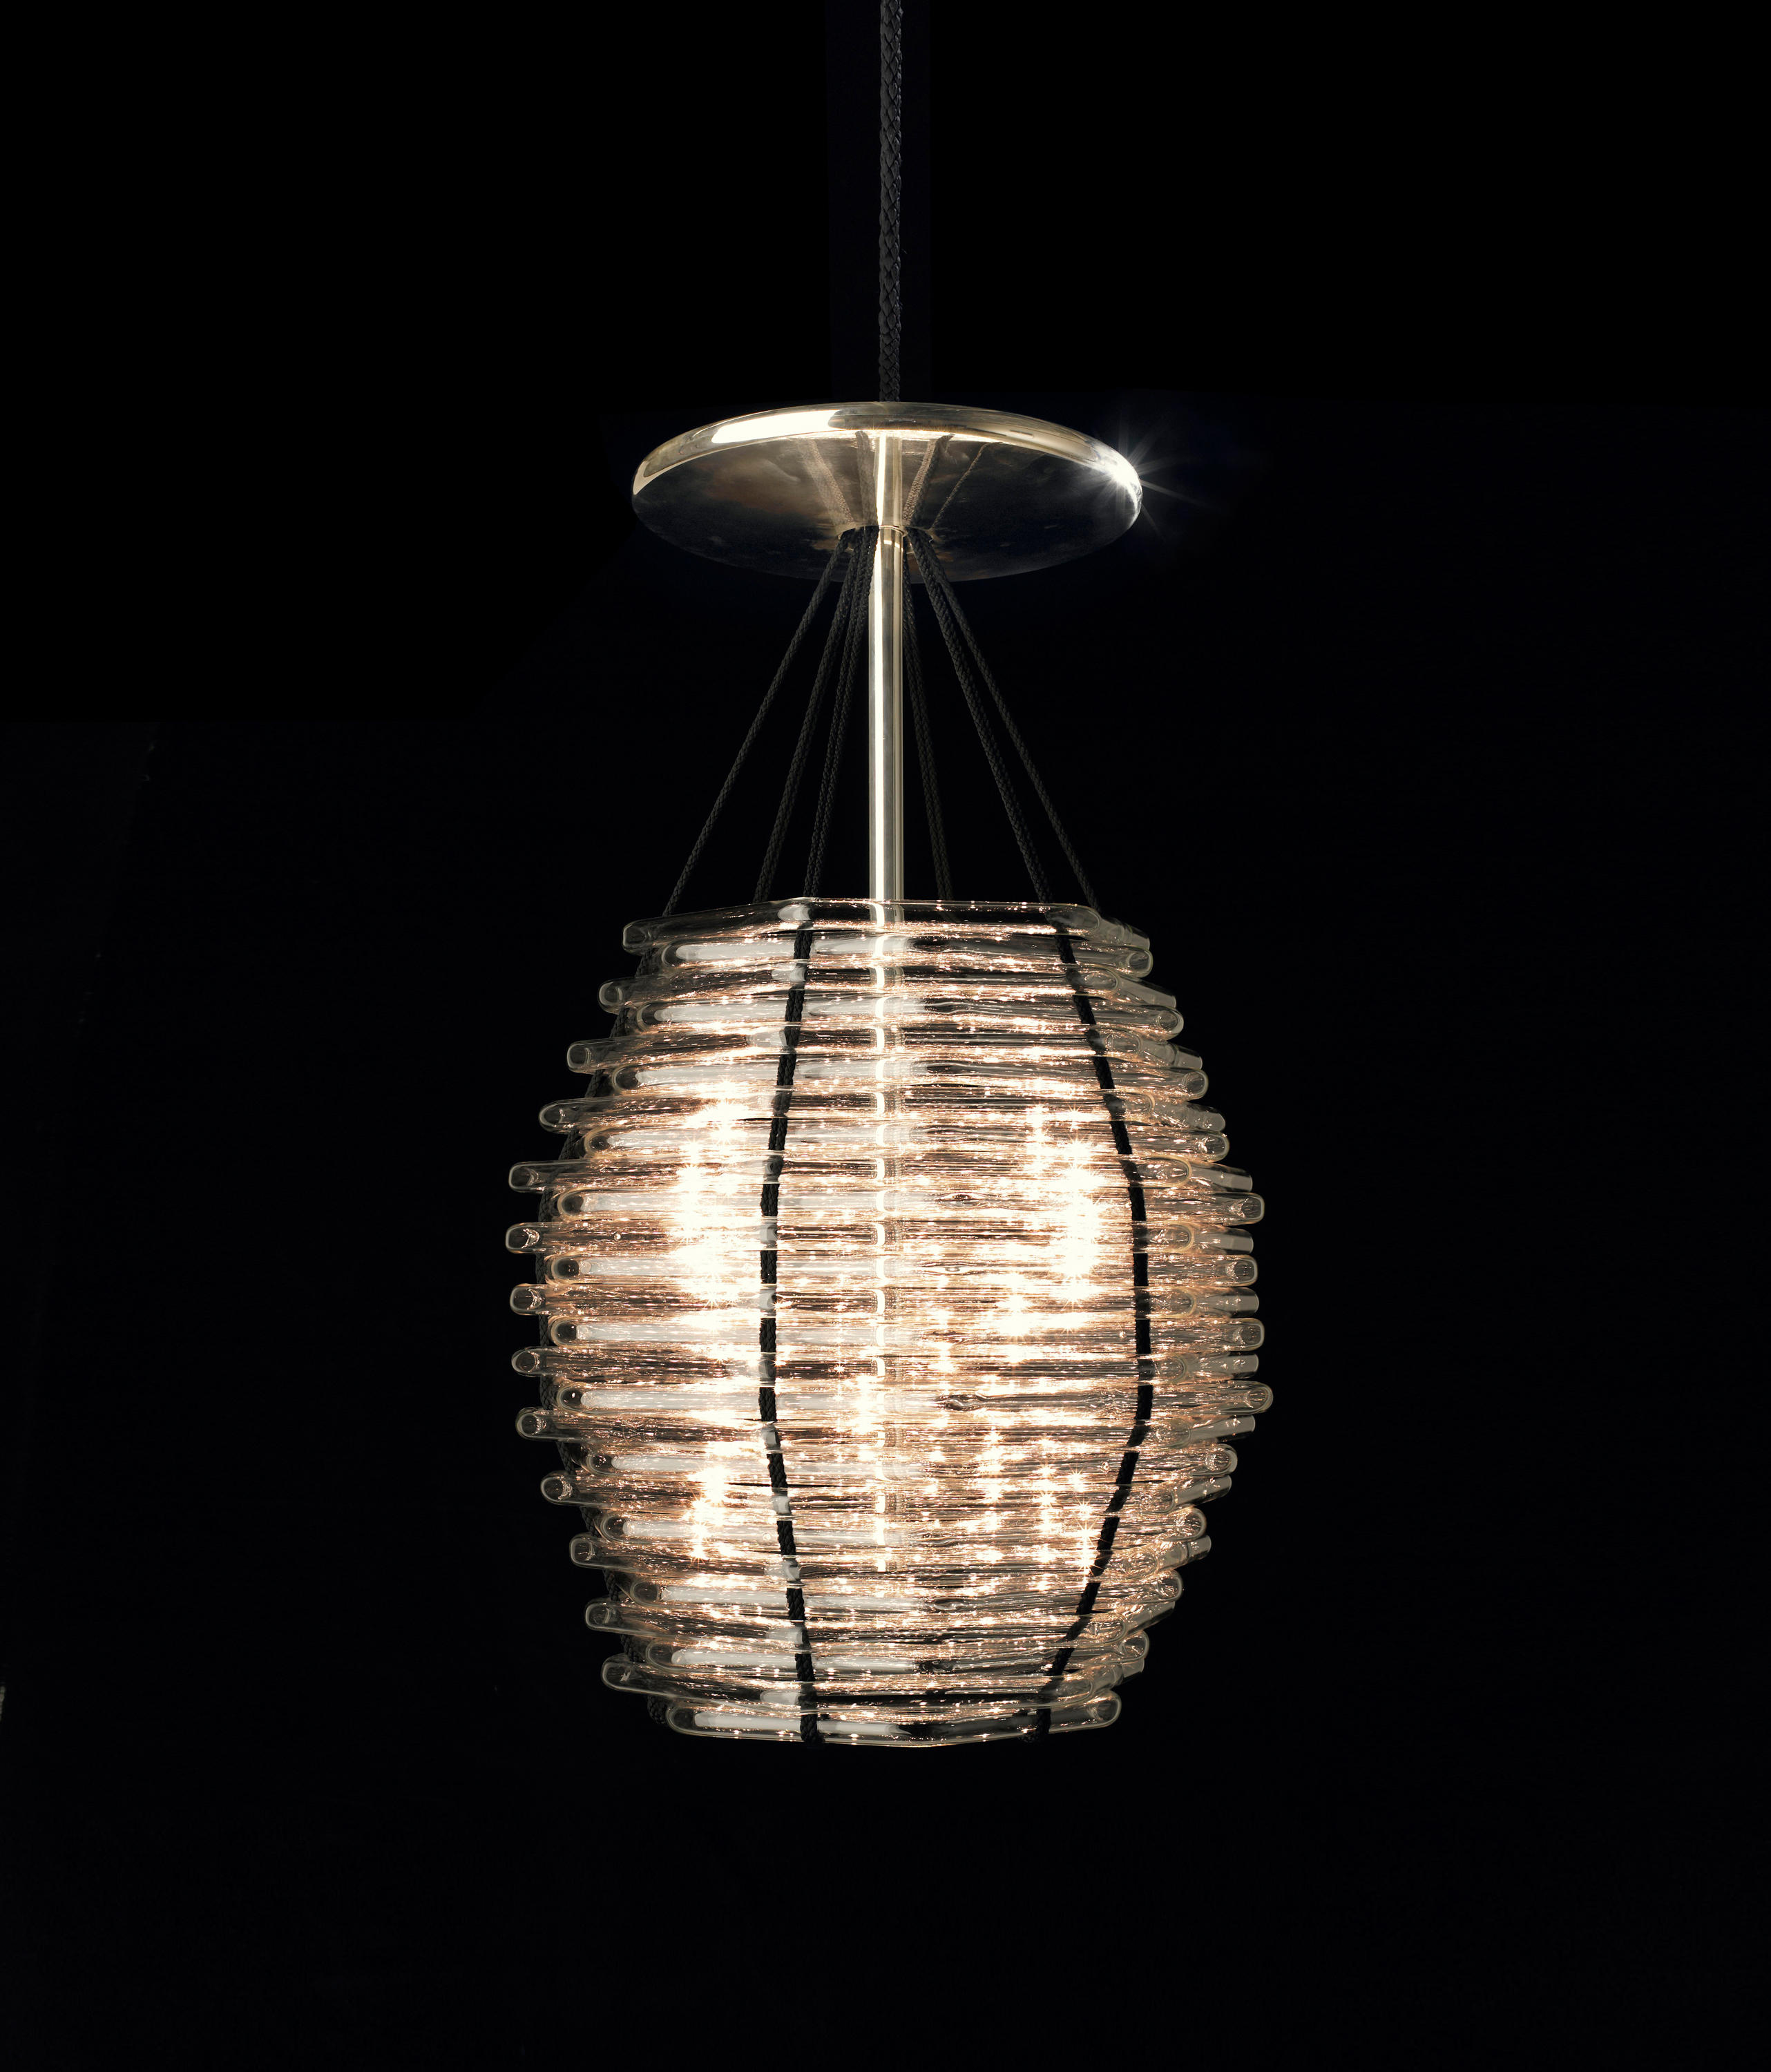 BASKET CHANDELIER - Ceiling suspended chandeliers from LOBMEYR | Architonic